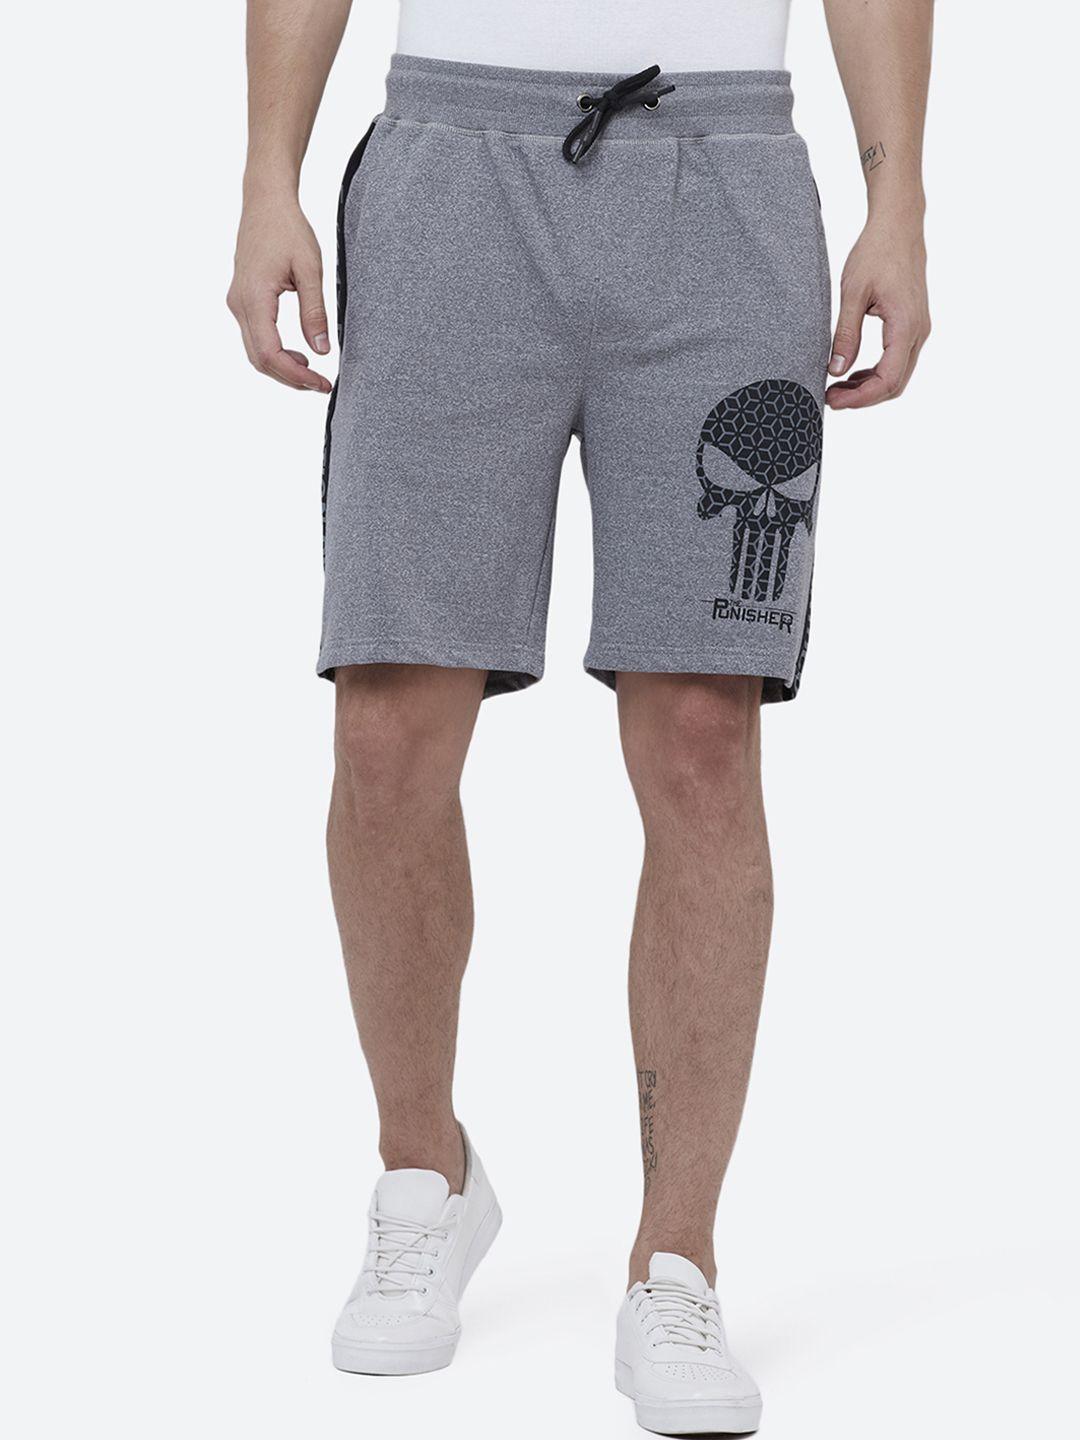 free-authority-punisher-featured-black-shorts-for-men